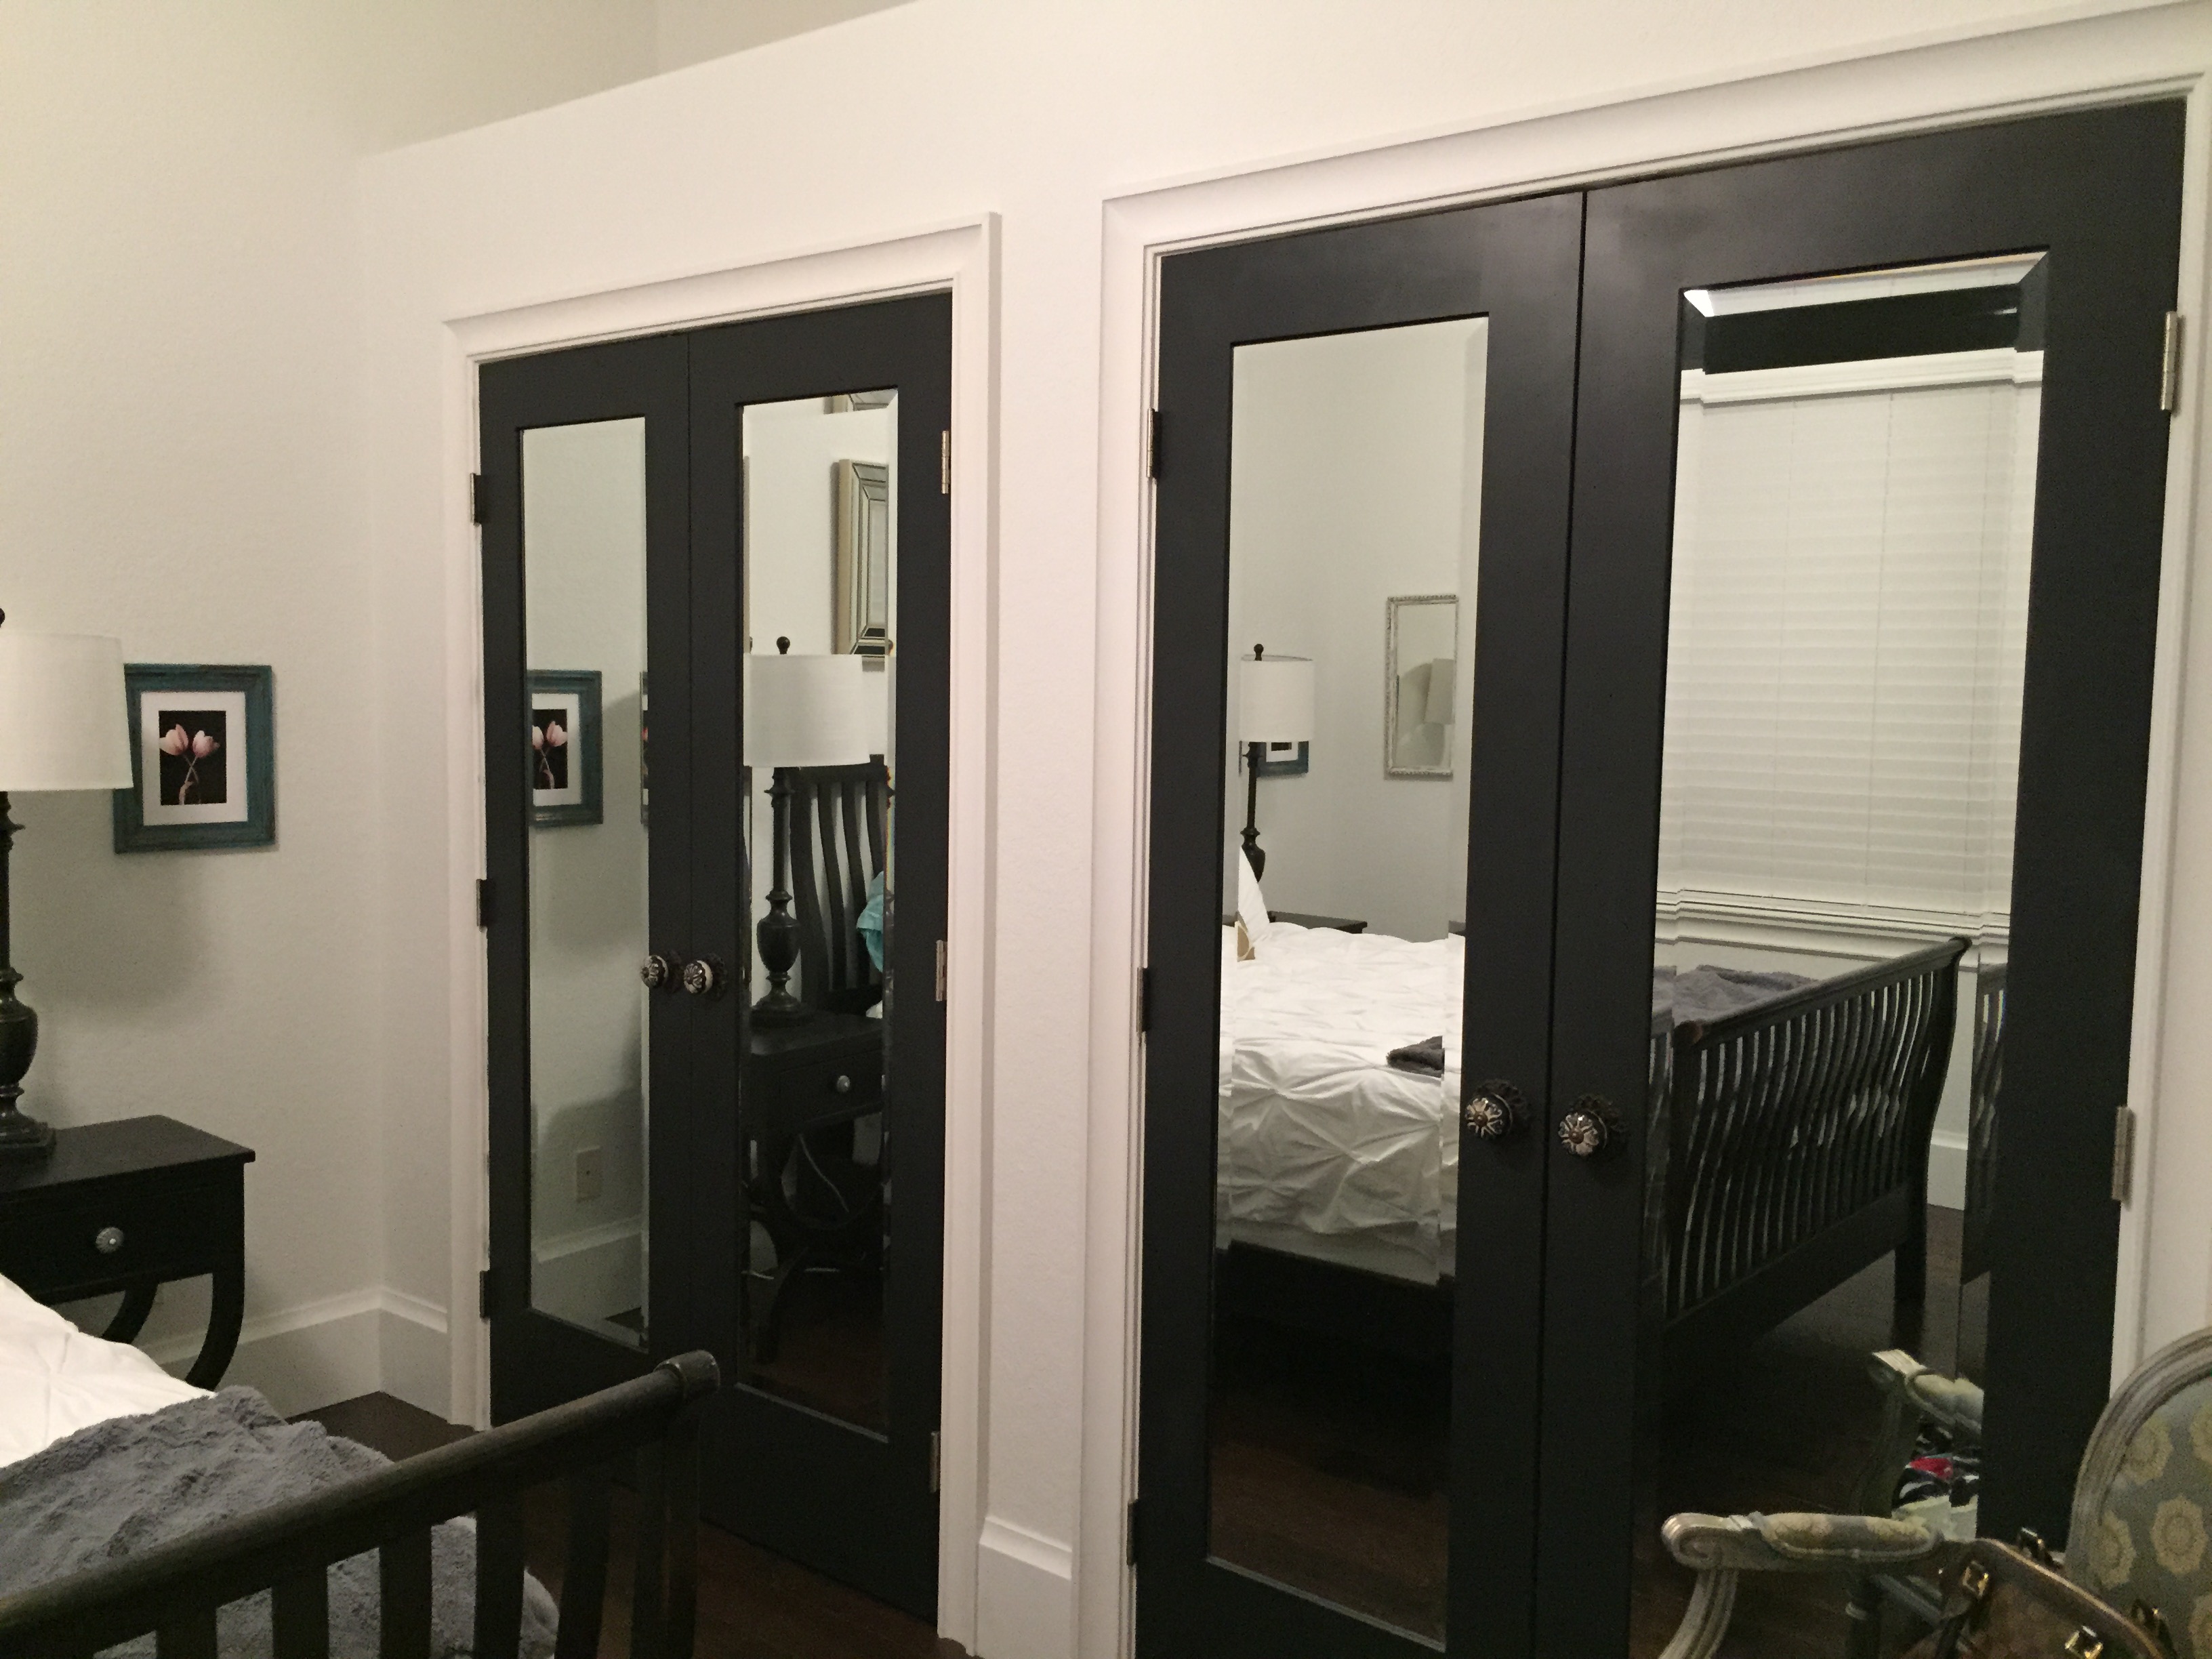 Mirror Closet Door Options, Are Mirrored Closet Doors Out Of Style